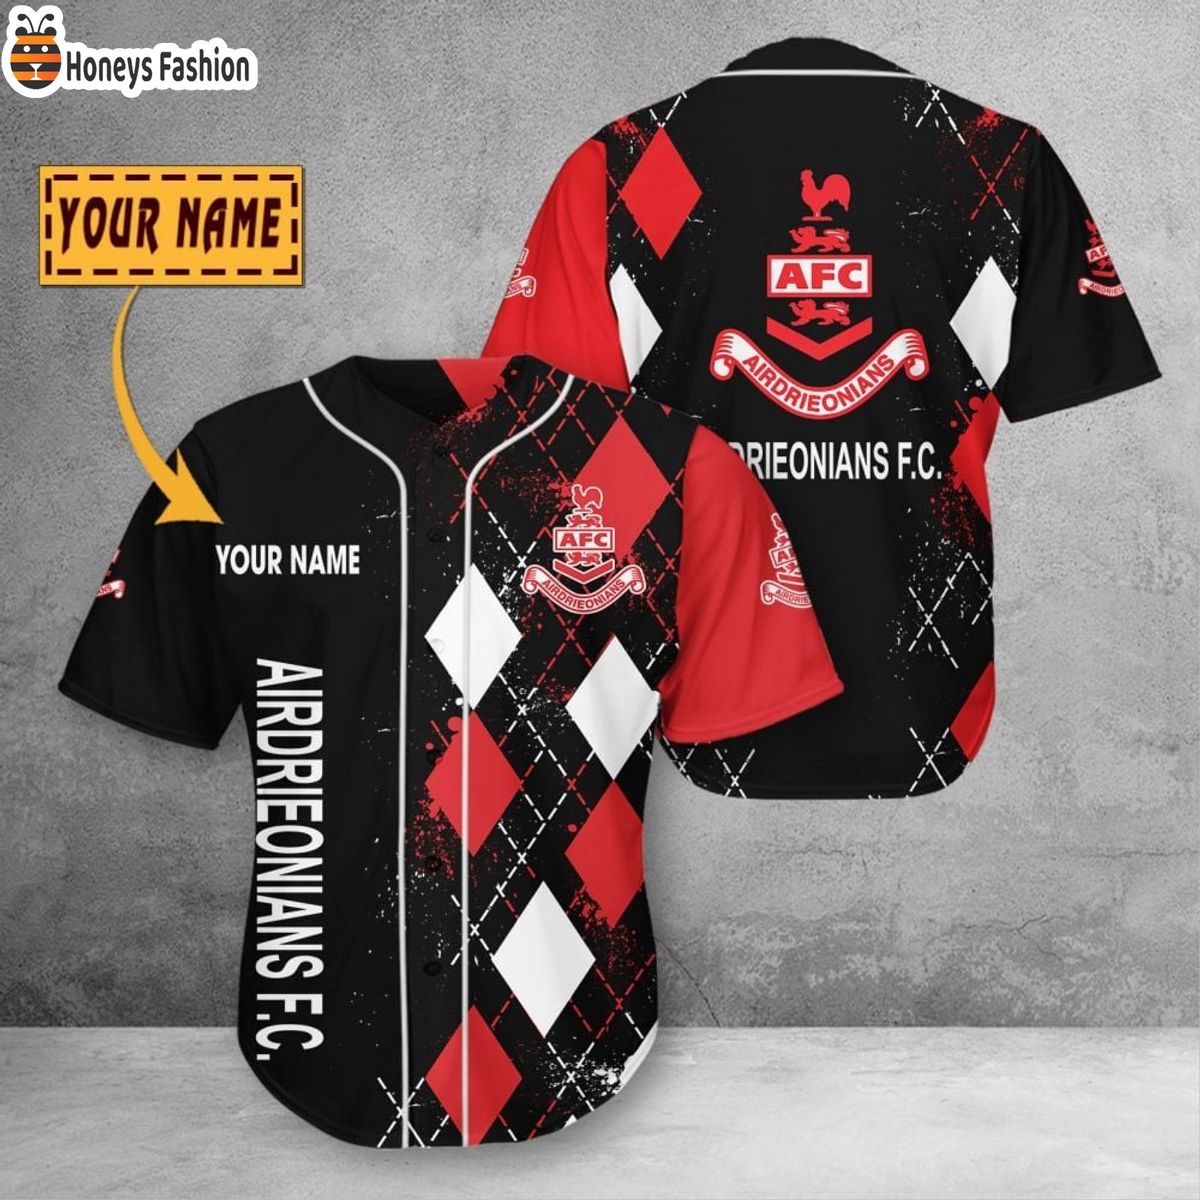 Personalized Airdrieonians F.C. Baseball Jersey